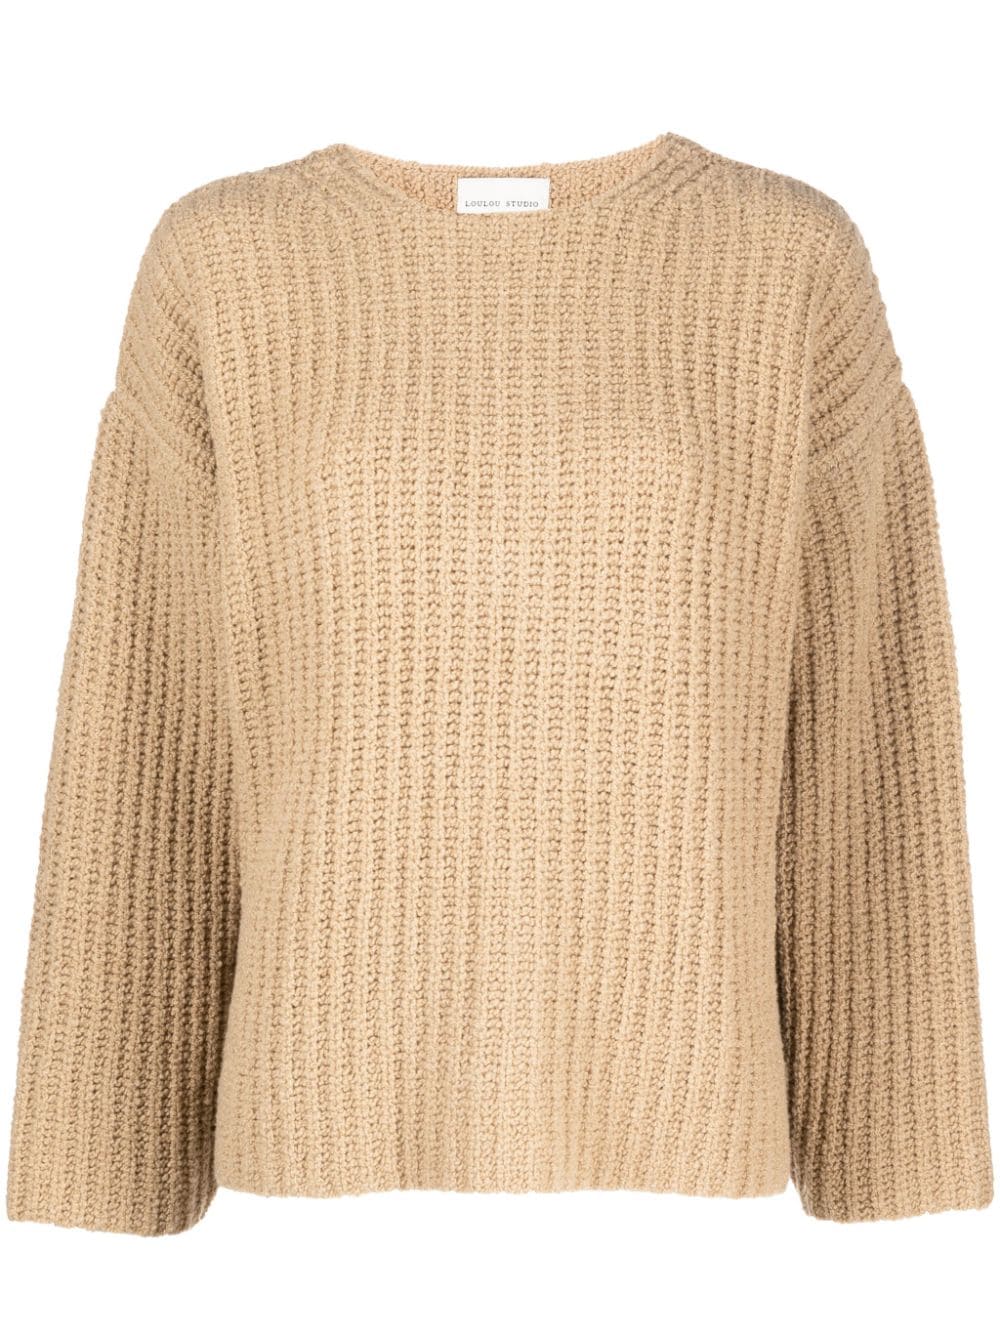 Loulou Studio Lola long-sleeved knitted jumper - Brown von Loulou Studio